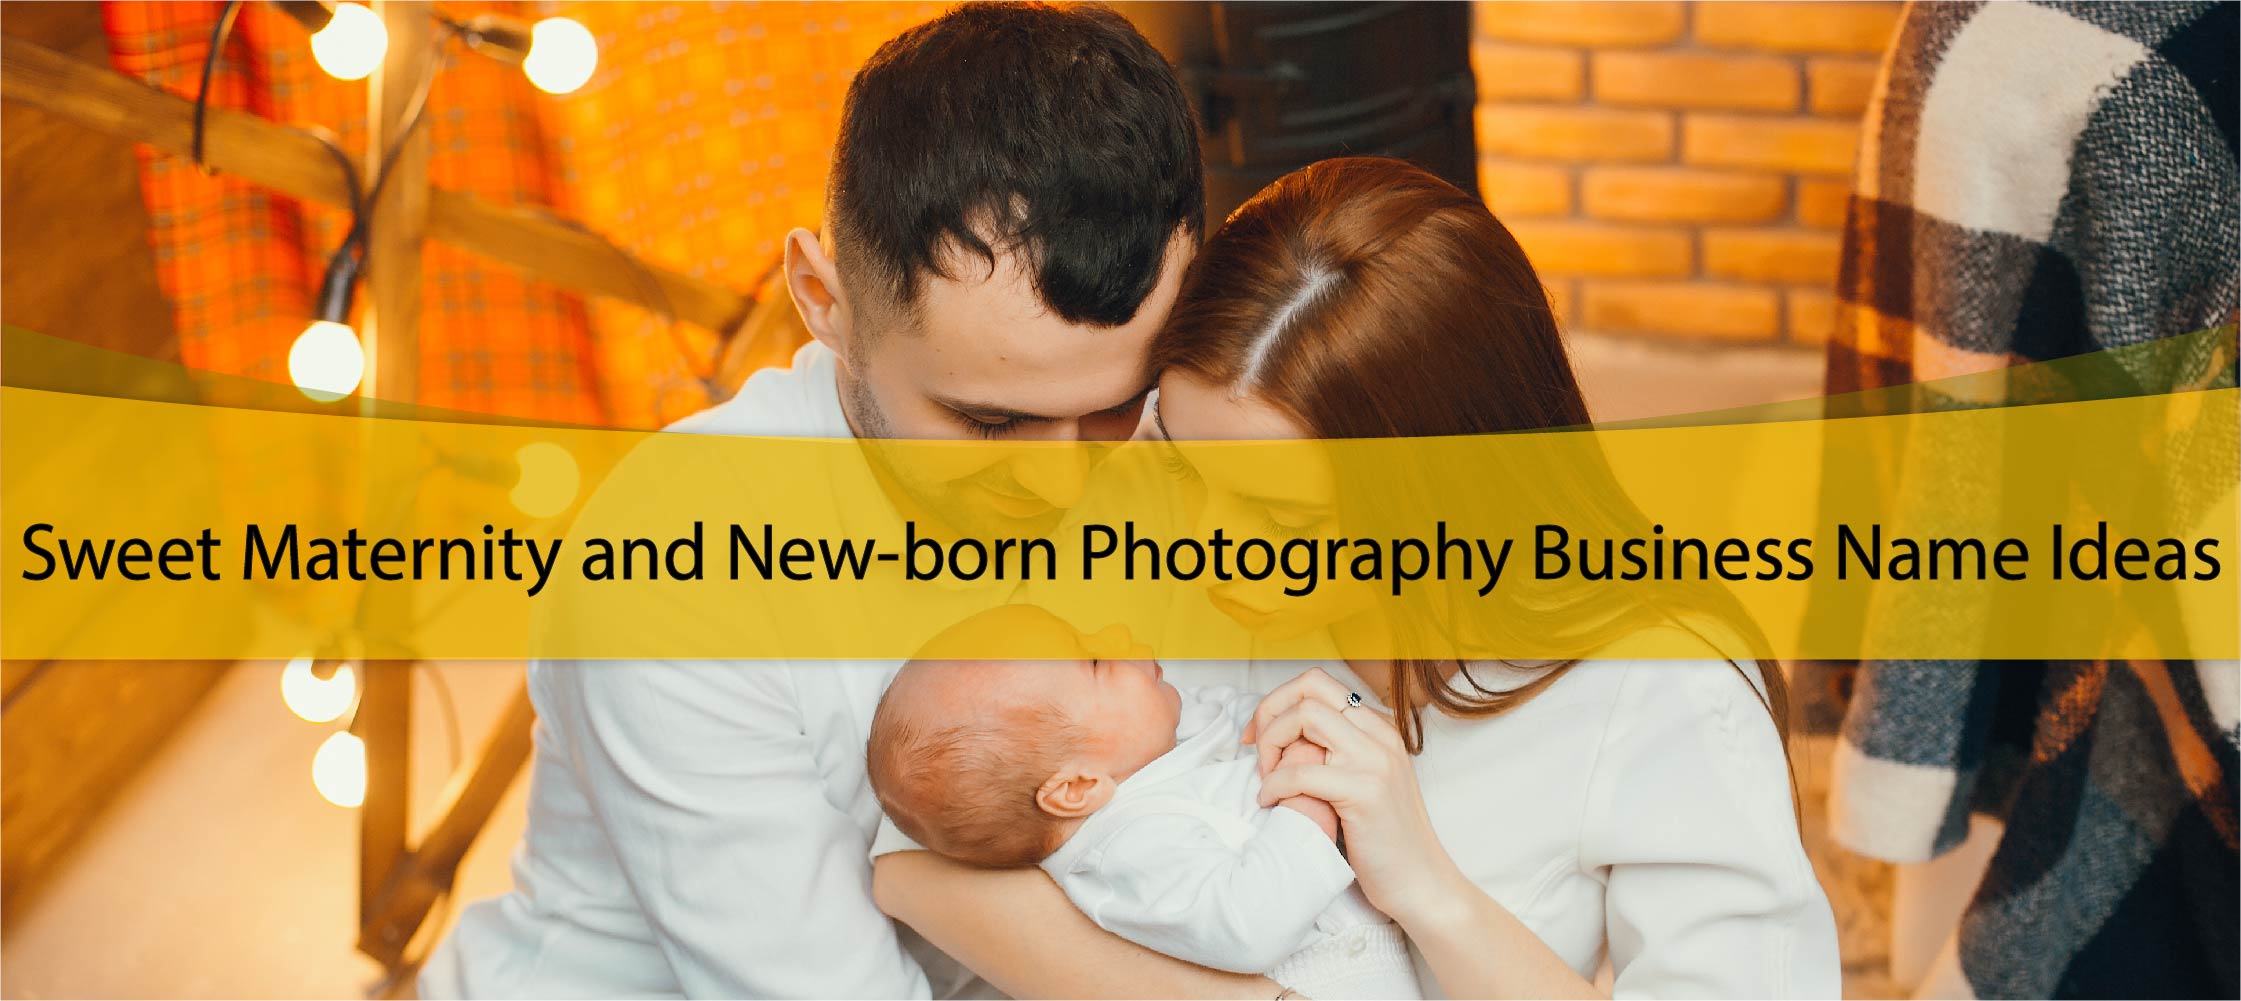 New-born Photography Business Name Ideas